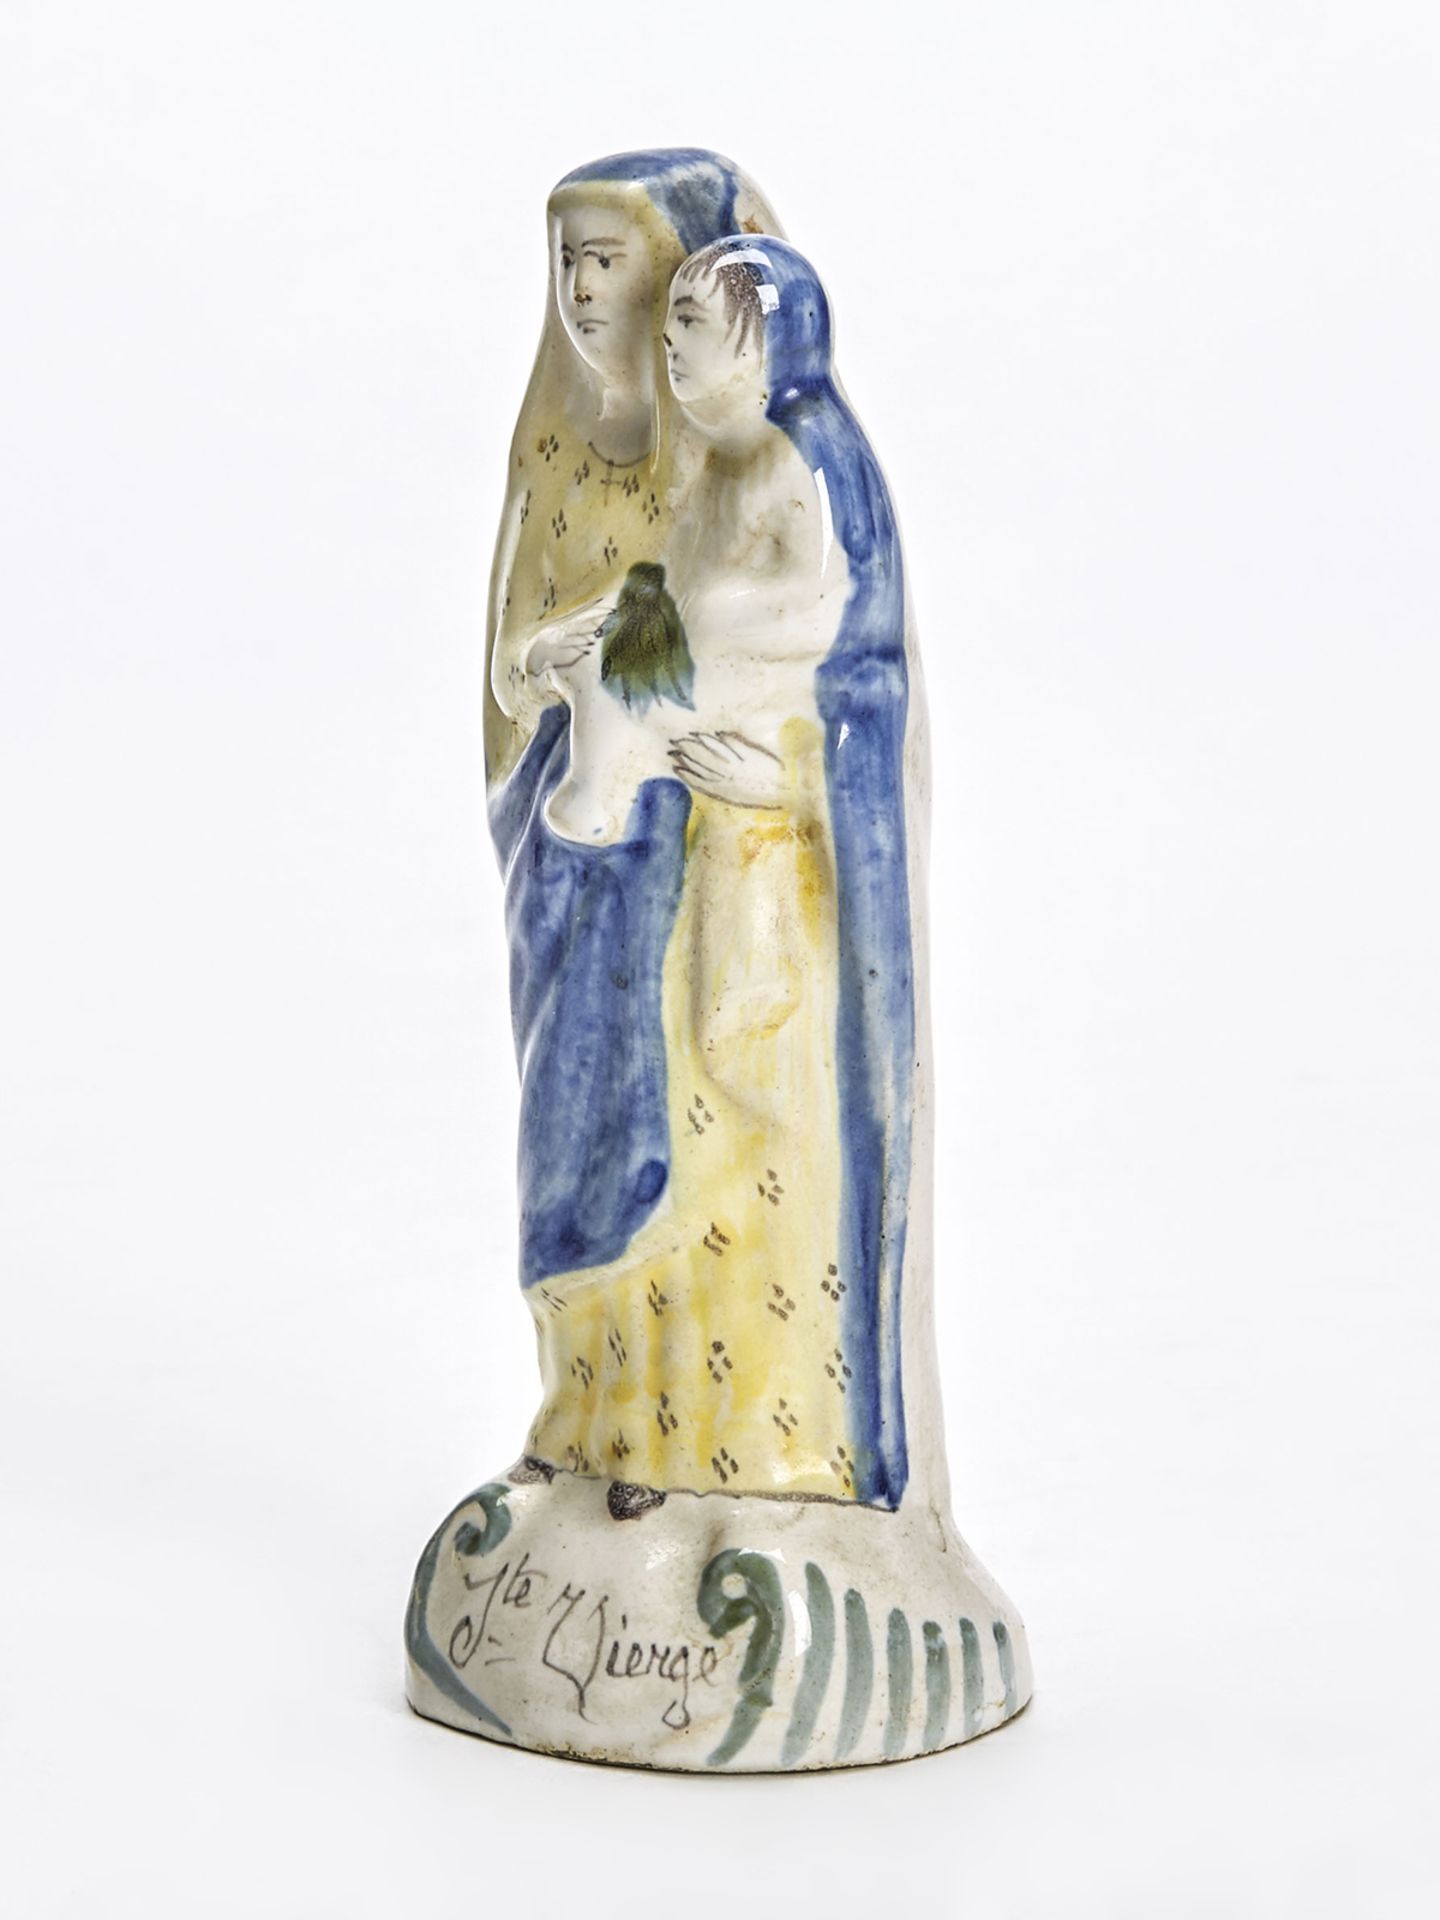 ANTIQUE FRENCH HENRIOT QUIMPER VIRGIN MARY FIGURE c.1900 - Image 5 of 7